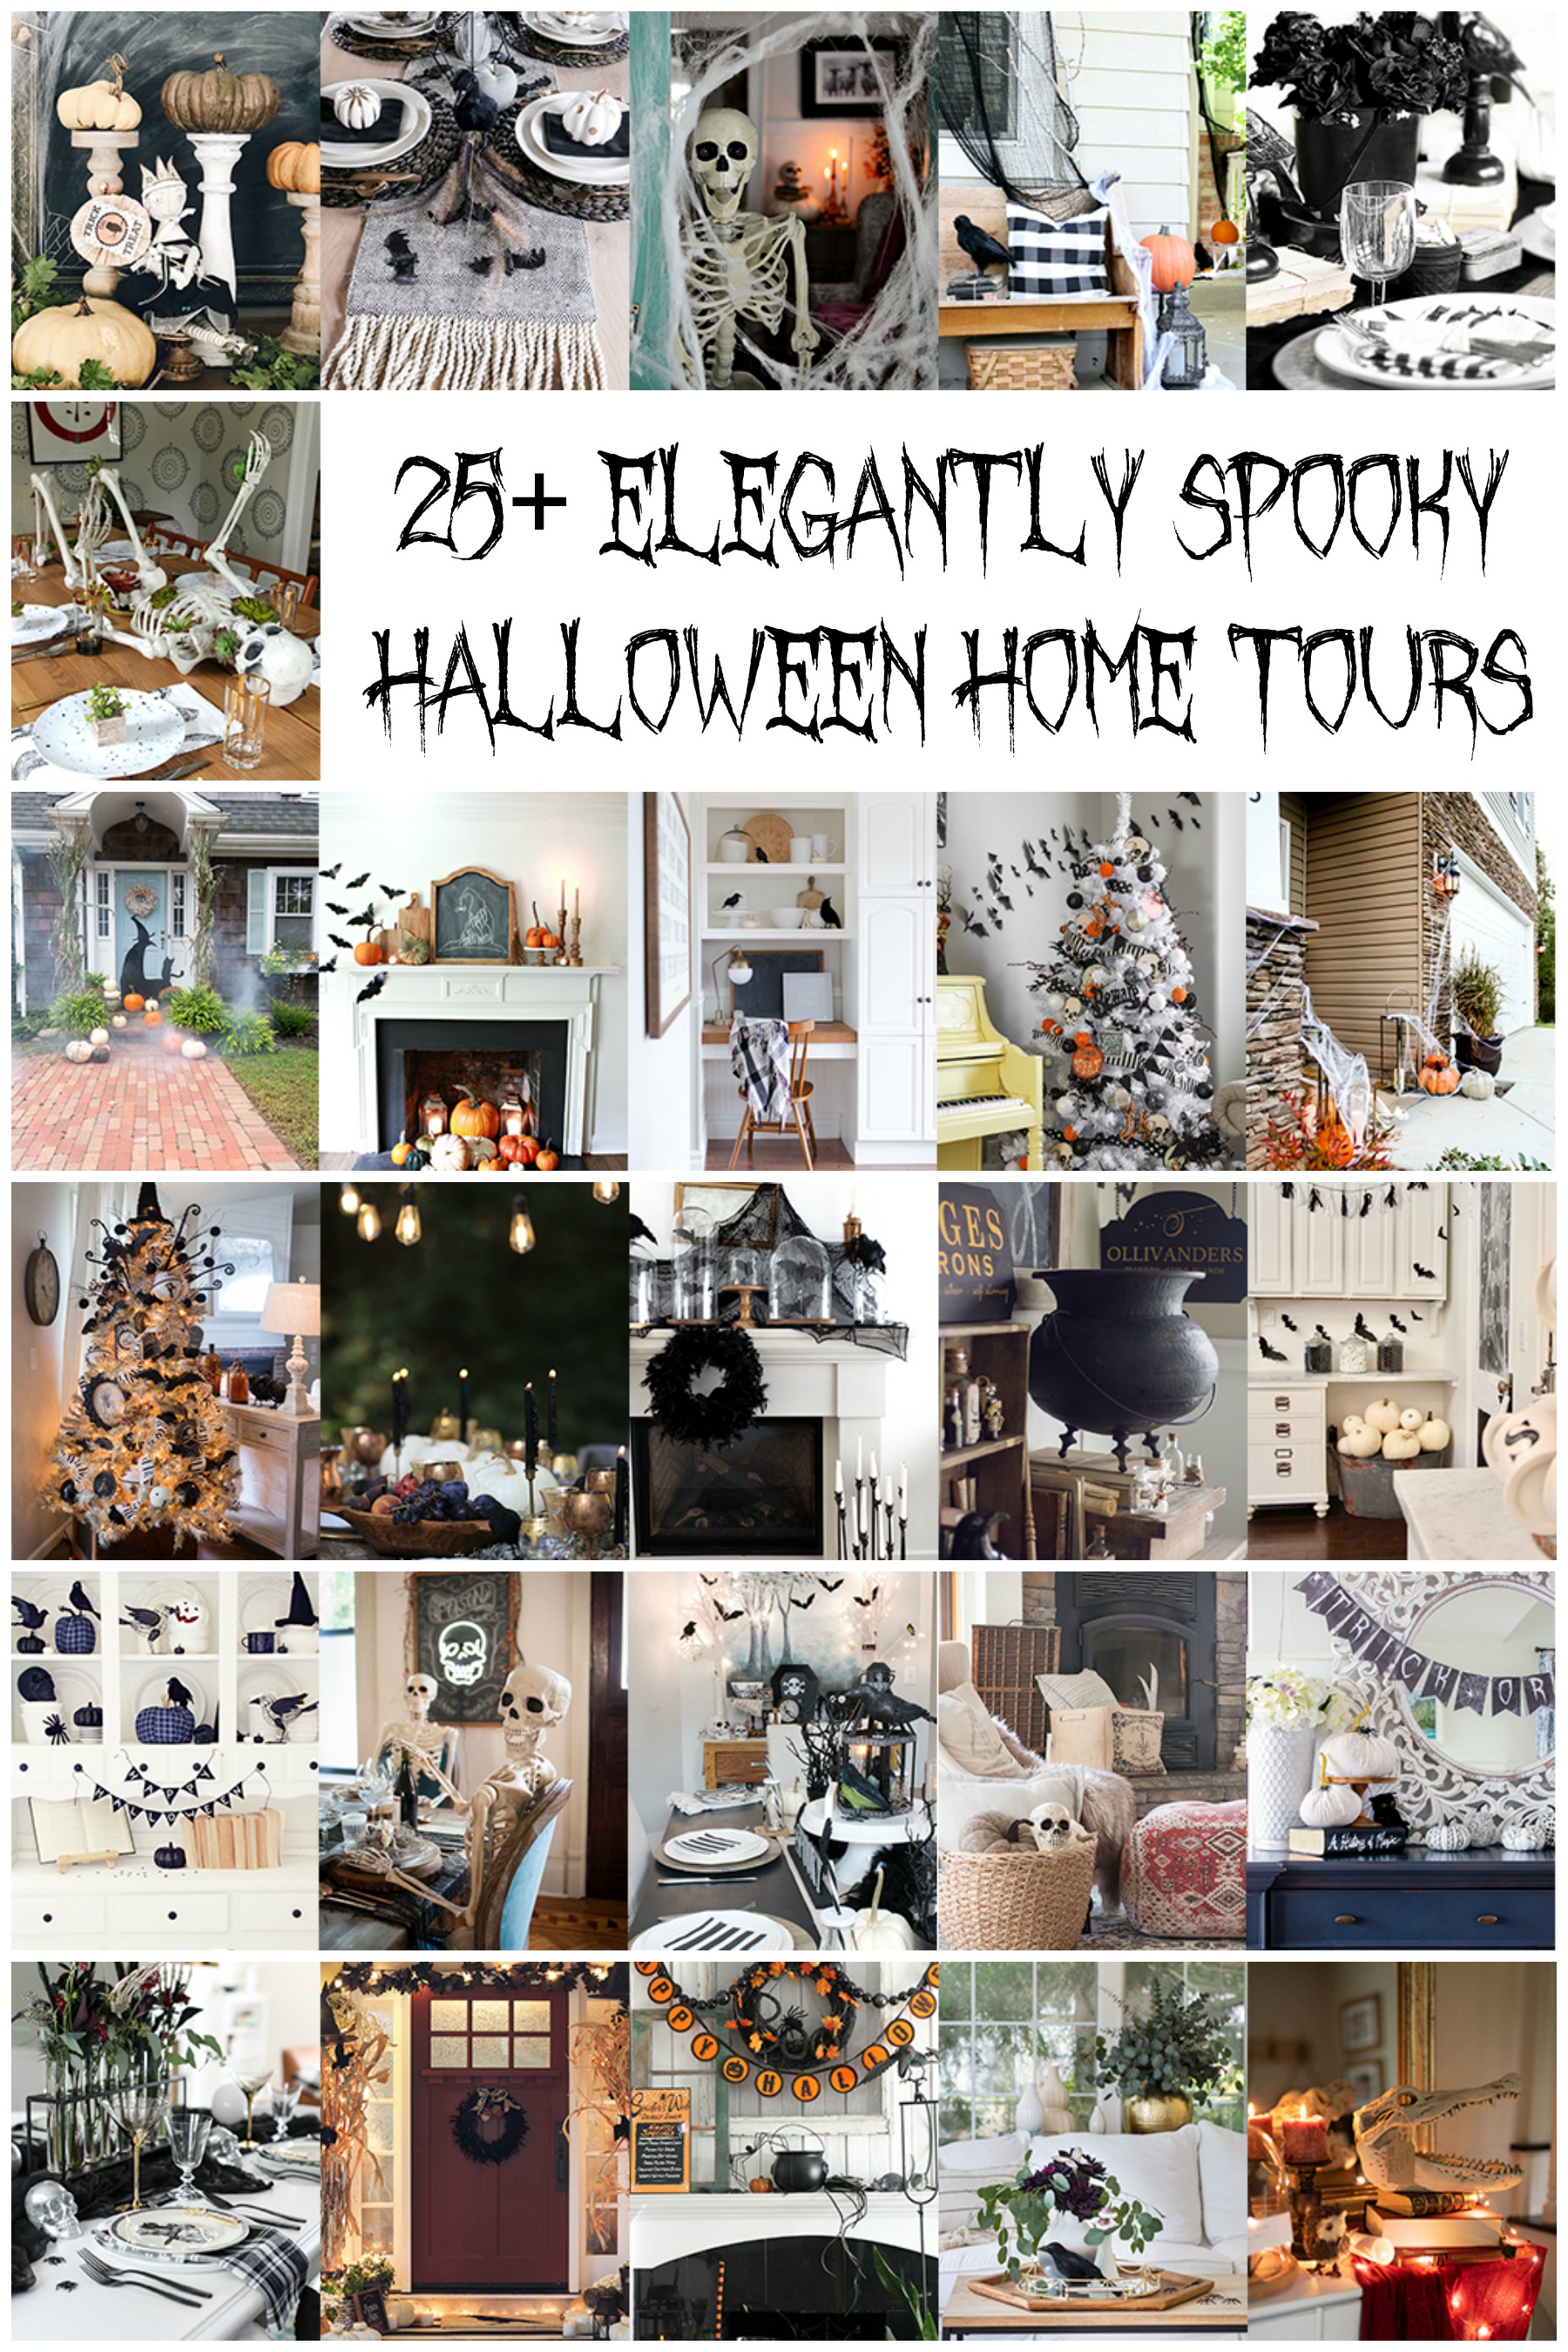 25+ Elegantly Spooky Halloween Home Tours graphic.